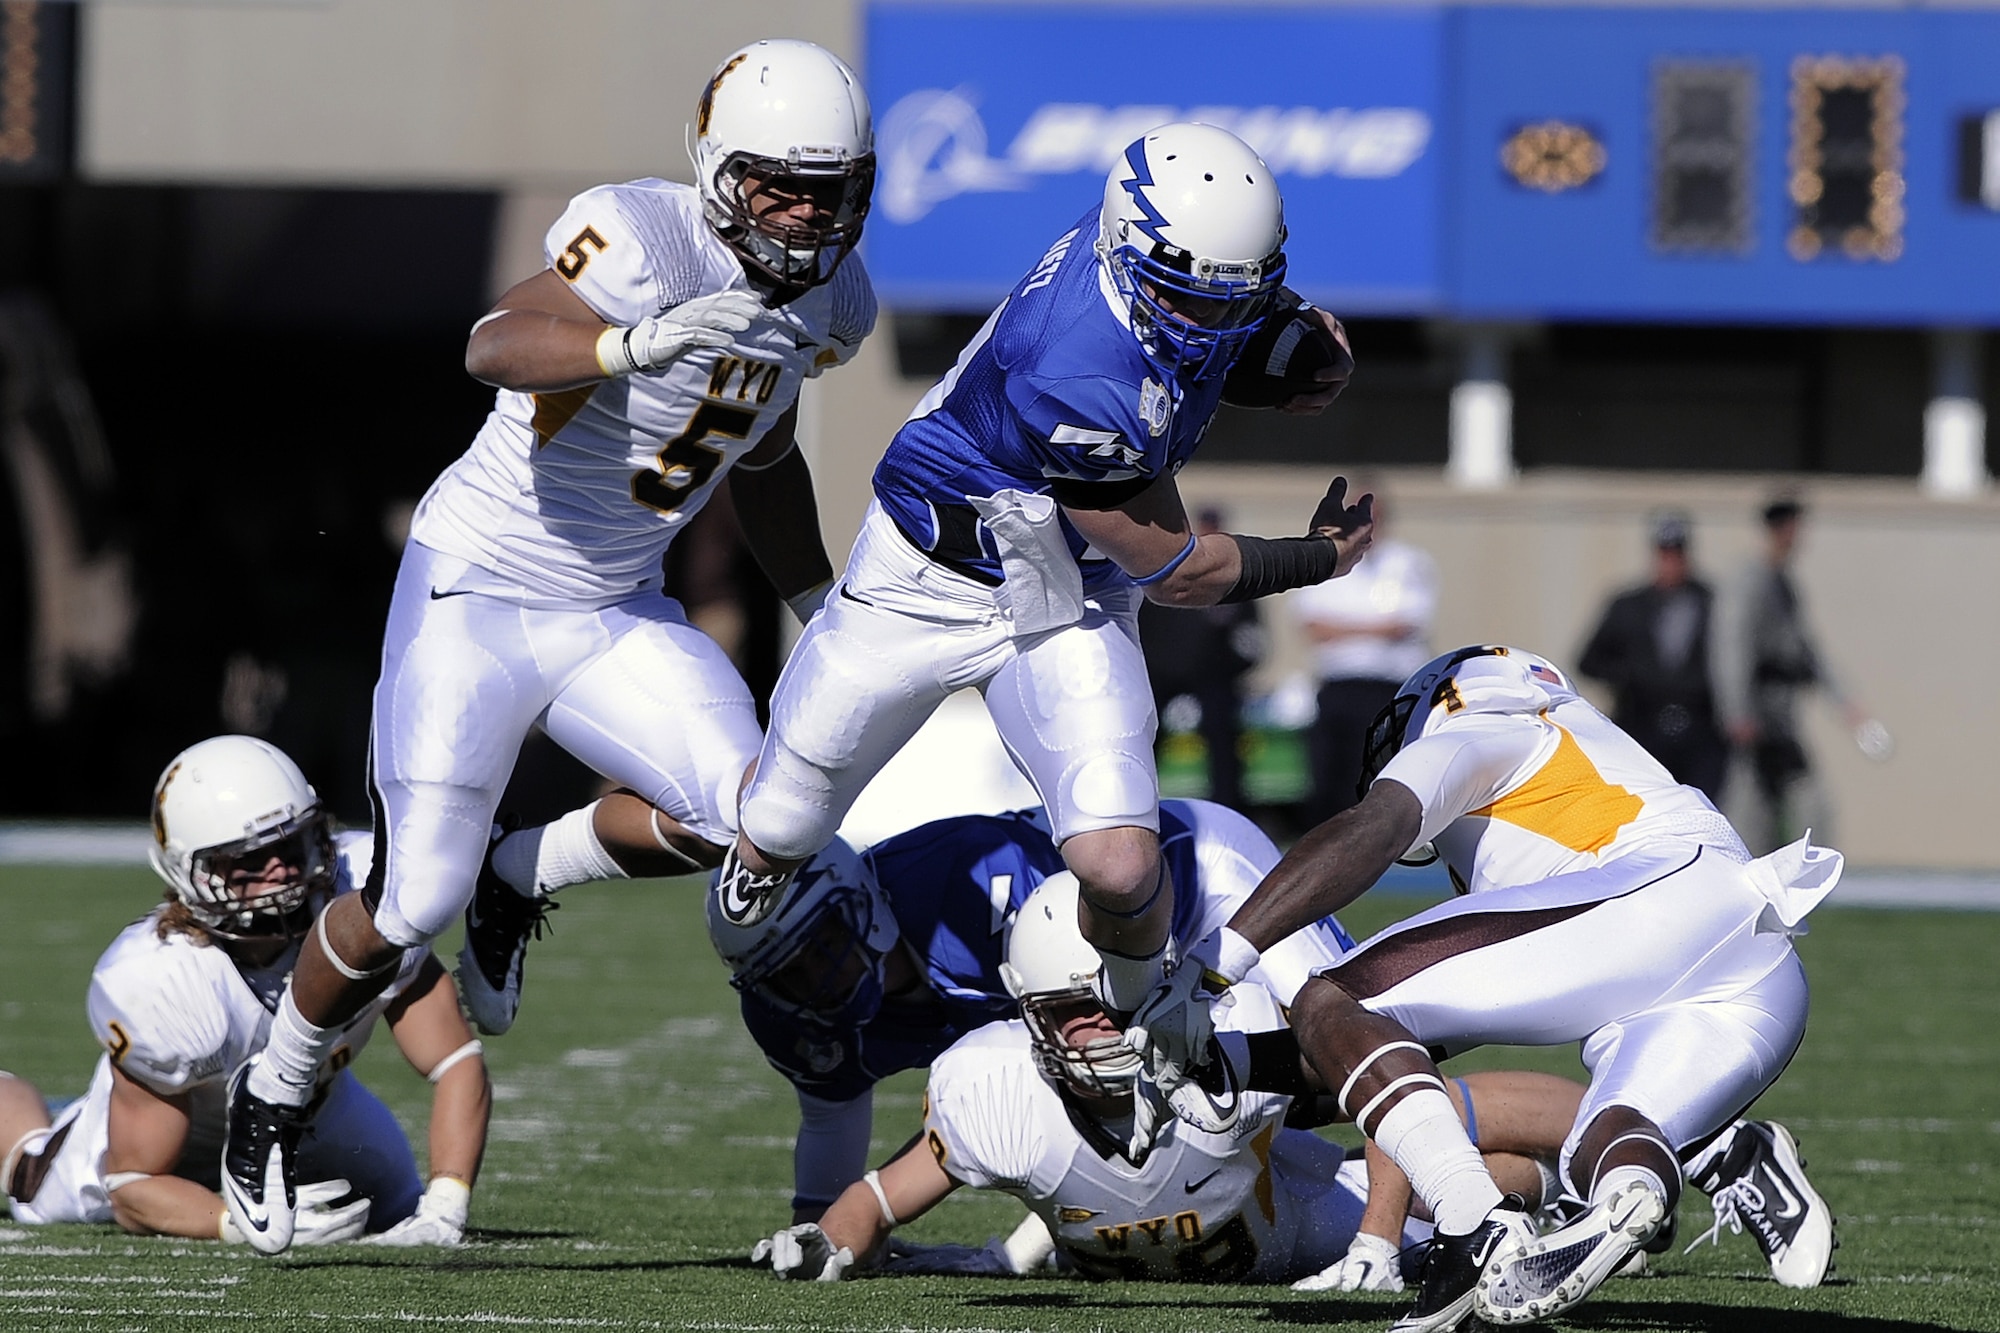 Senior quarterback Connor Deitz fights for yardage against the Wyoming Cowboys at Falcon Stadium Nov. 12, 2011, in Colorado Springs, Colo. The Cowboys defeated Air Force 25-17. (U.S. Air Force photo/Mike Kaplan)